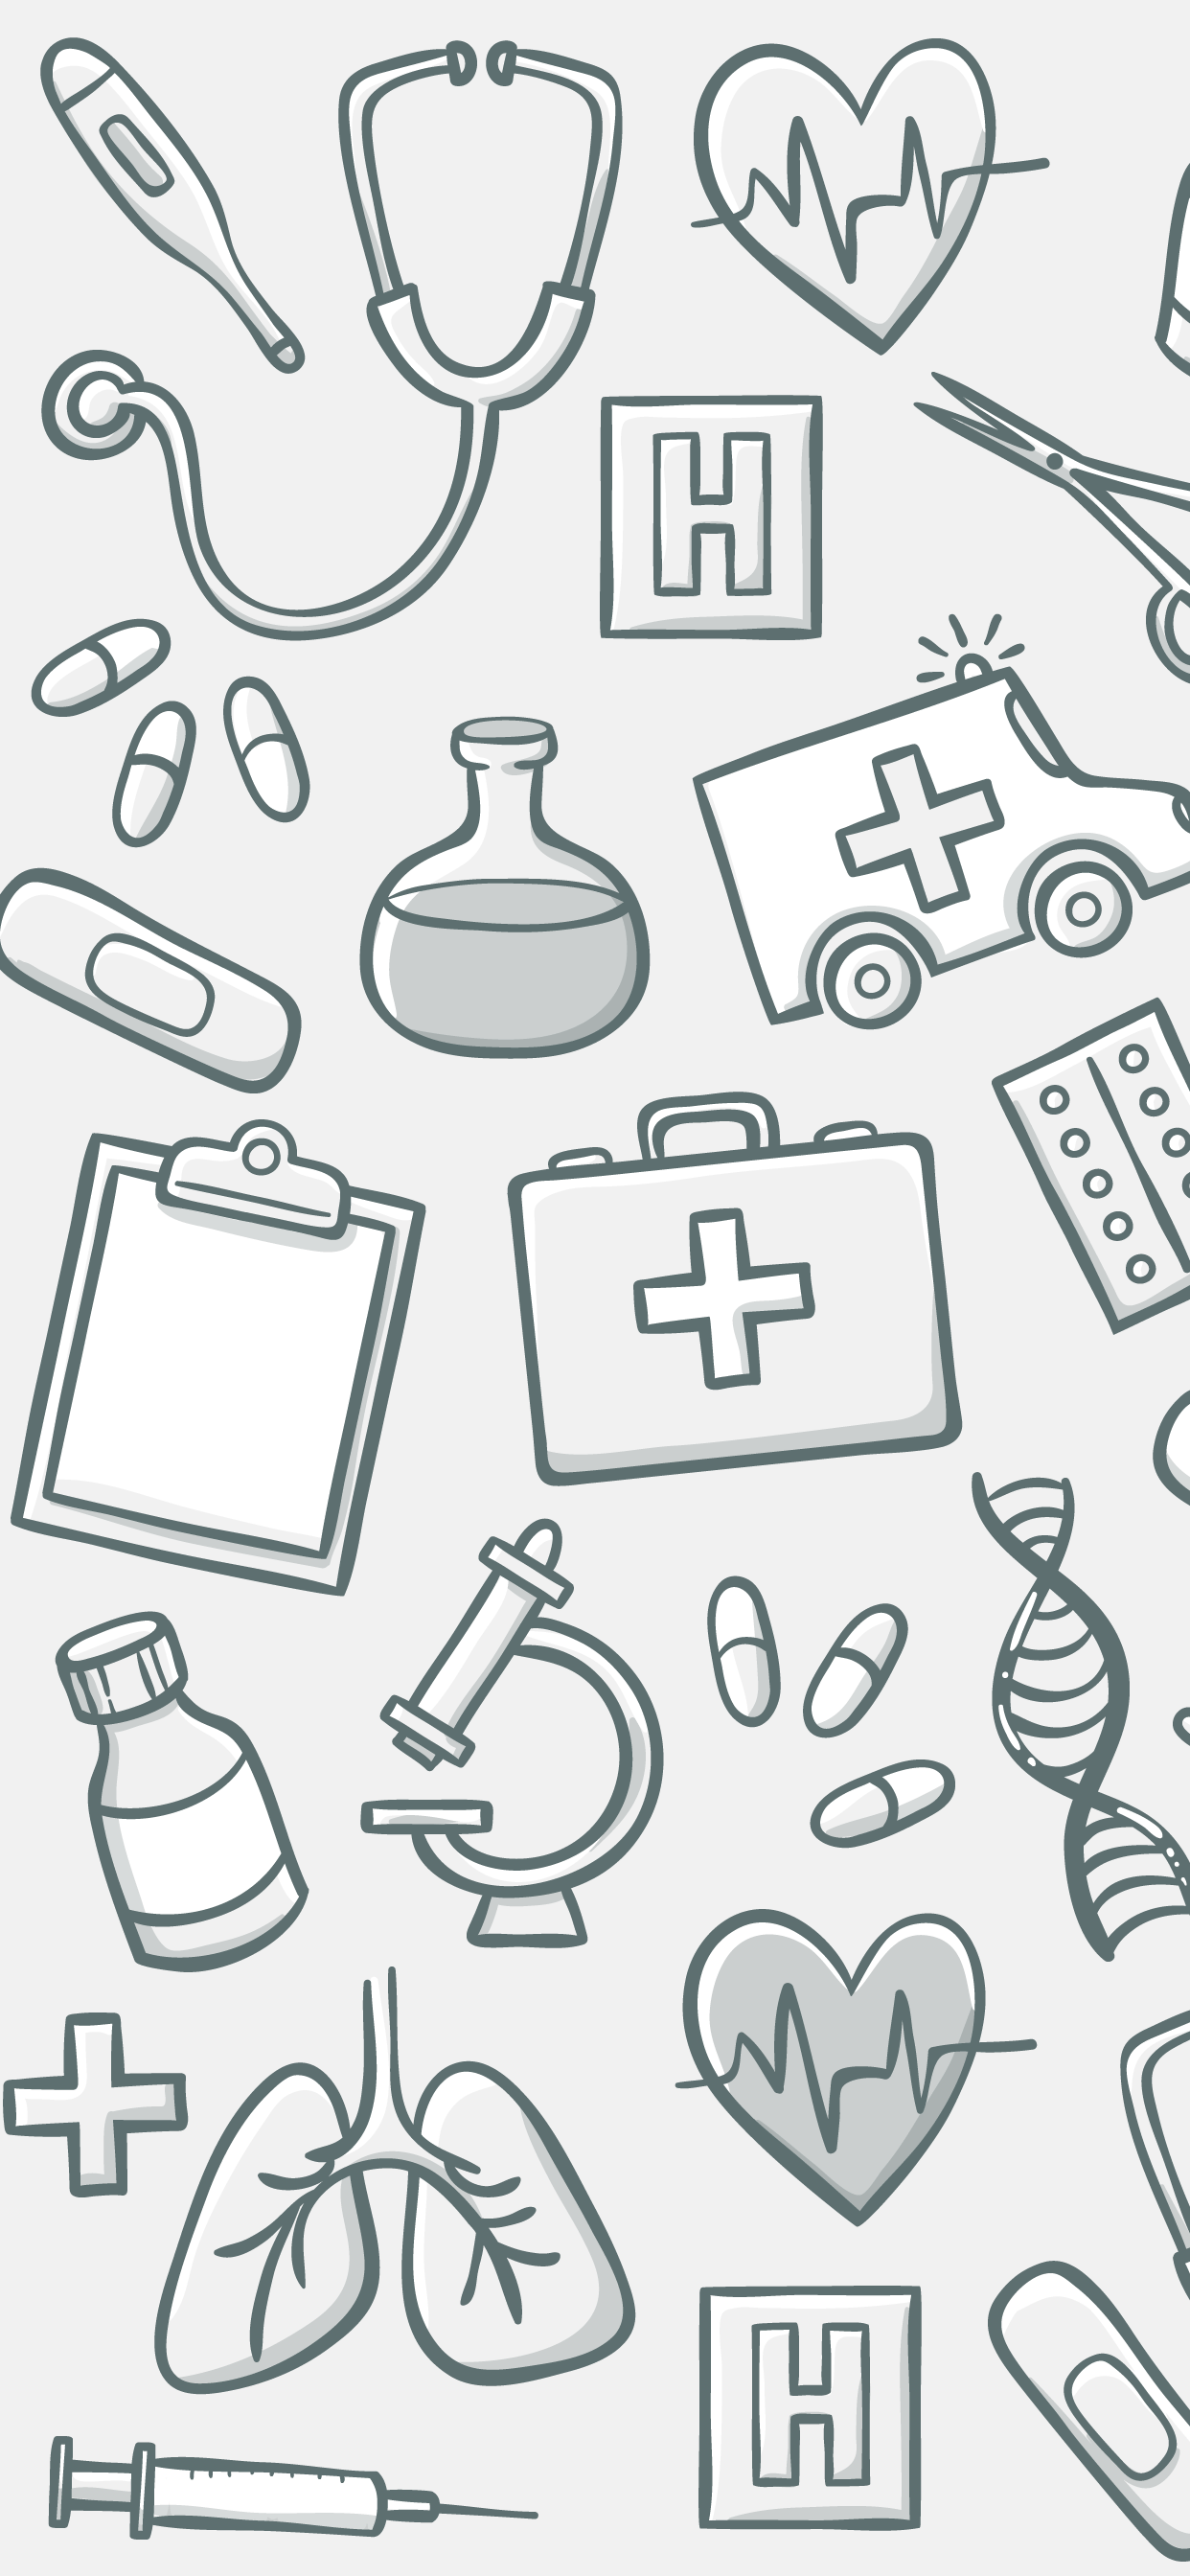 A gray and white medical themed wallpaper - 